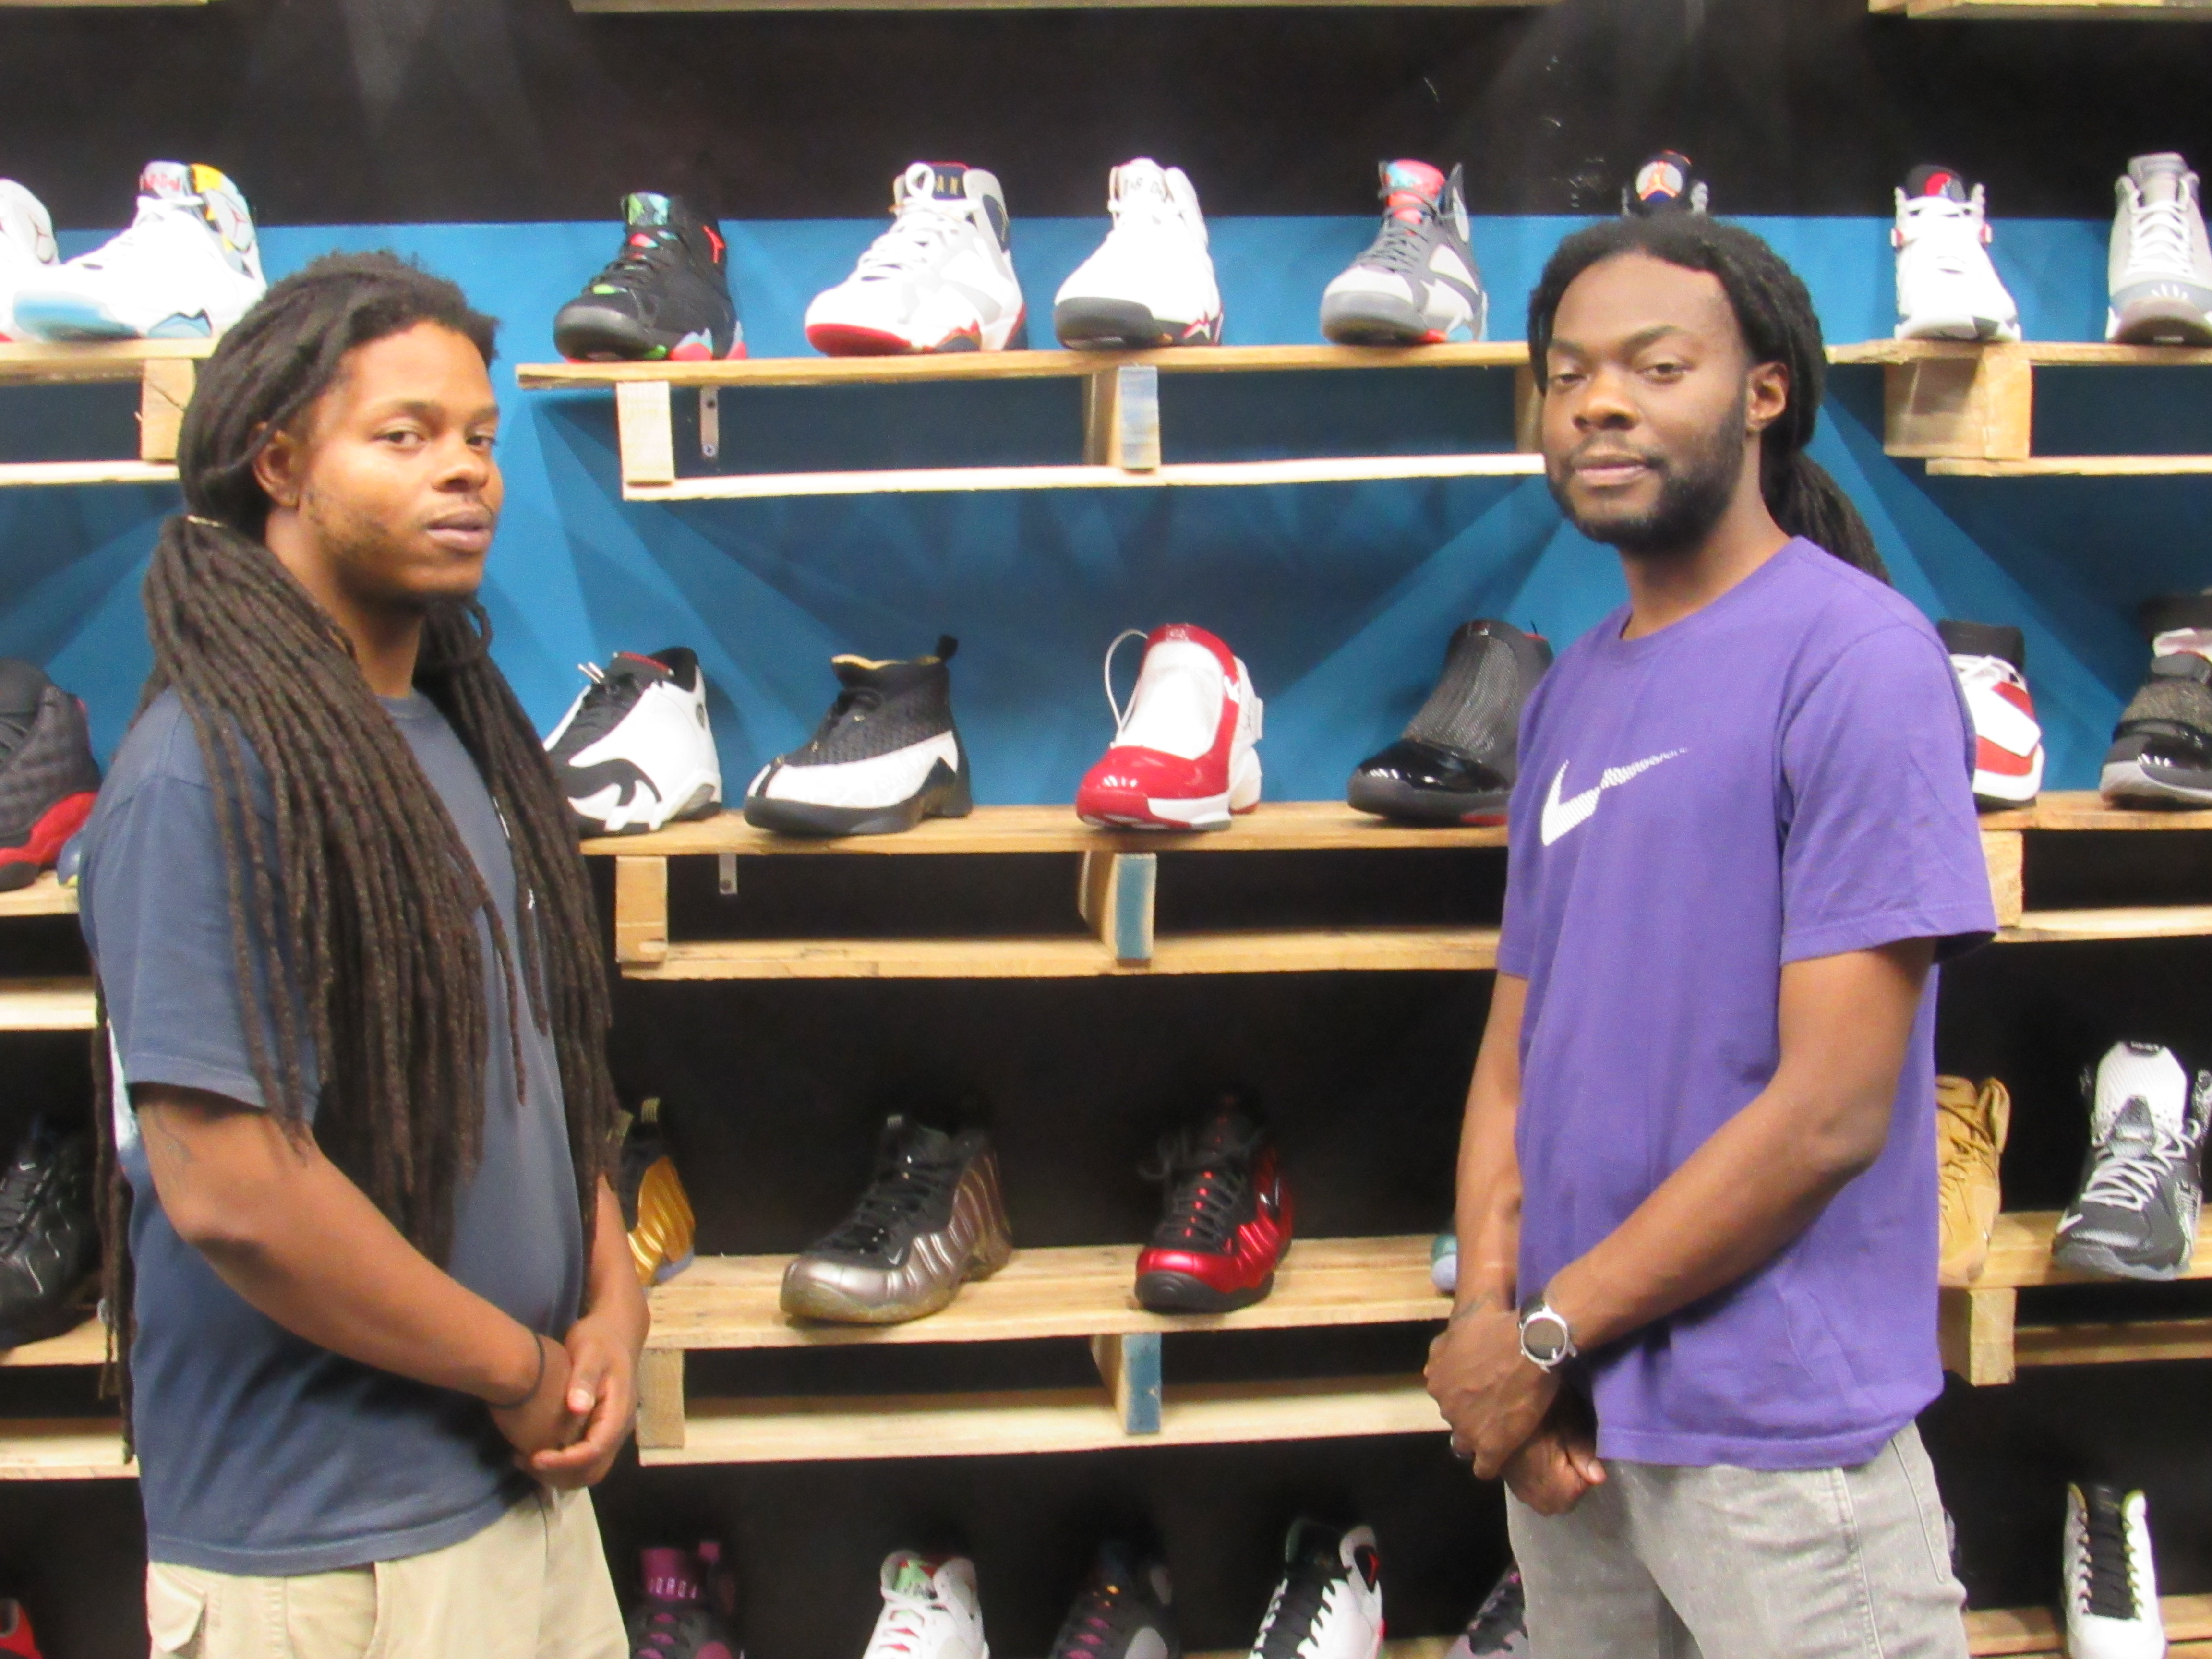 Lauron Pijeaux (left) and Joe Brown (right) have been friends for more than 15 years and attended John Carroll High School together. They overcame a number of obstacles to open Laced Up Boutique. (Special to The Times)